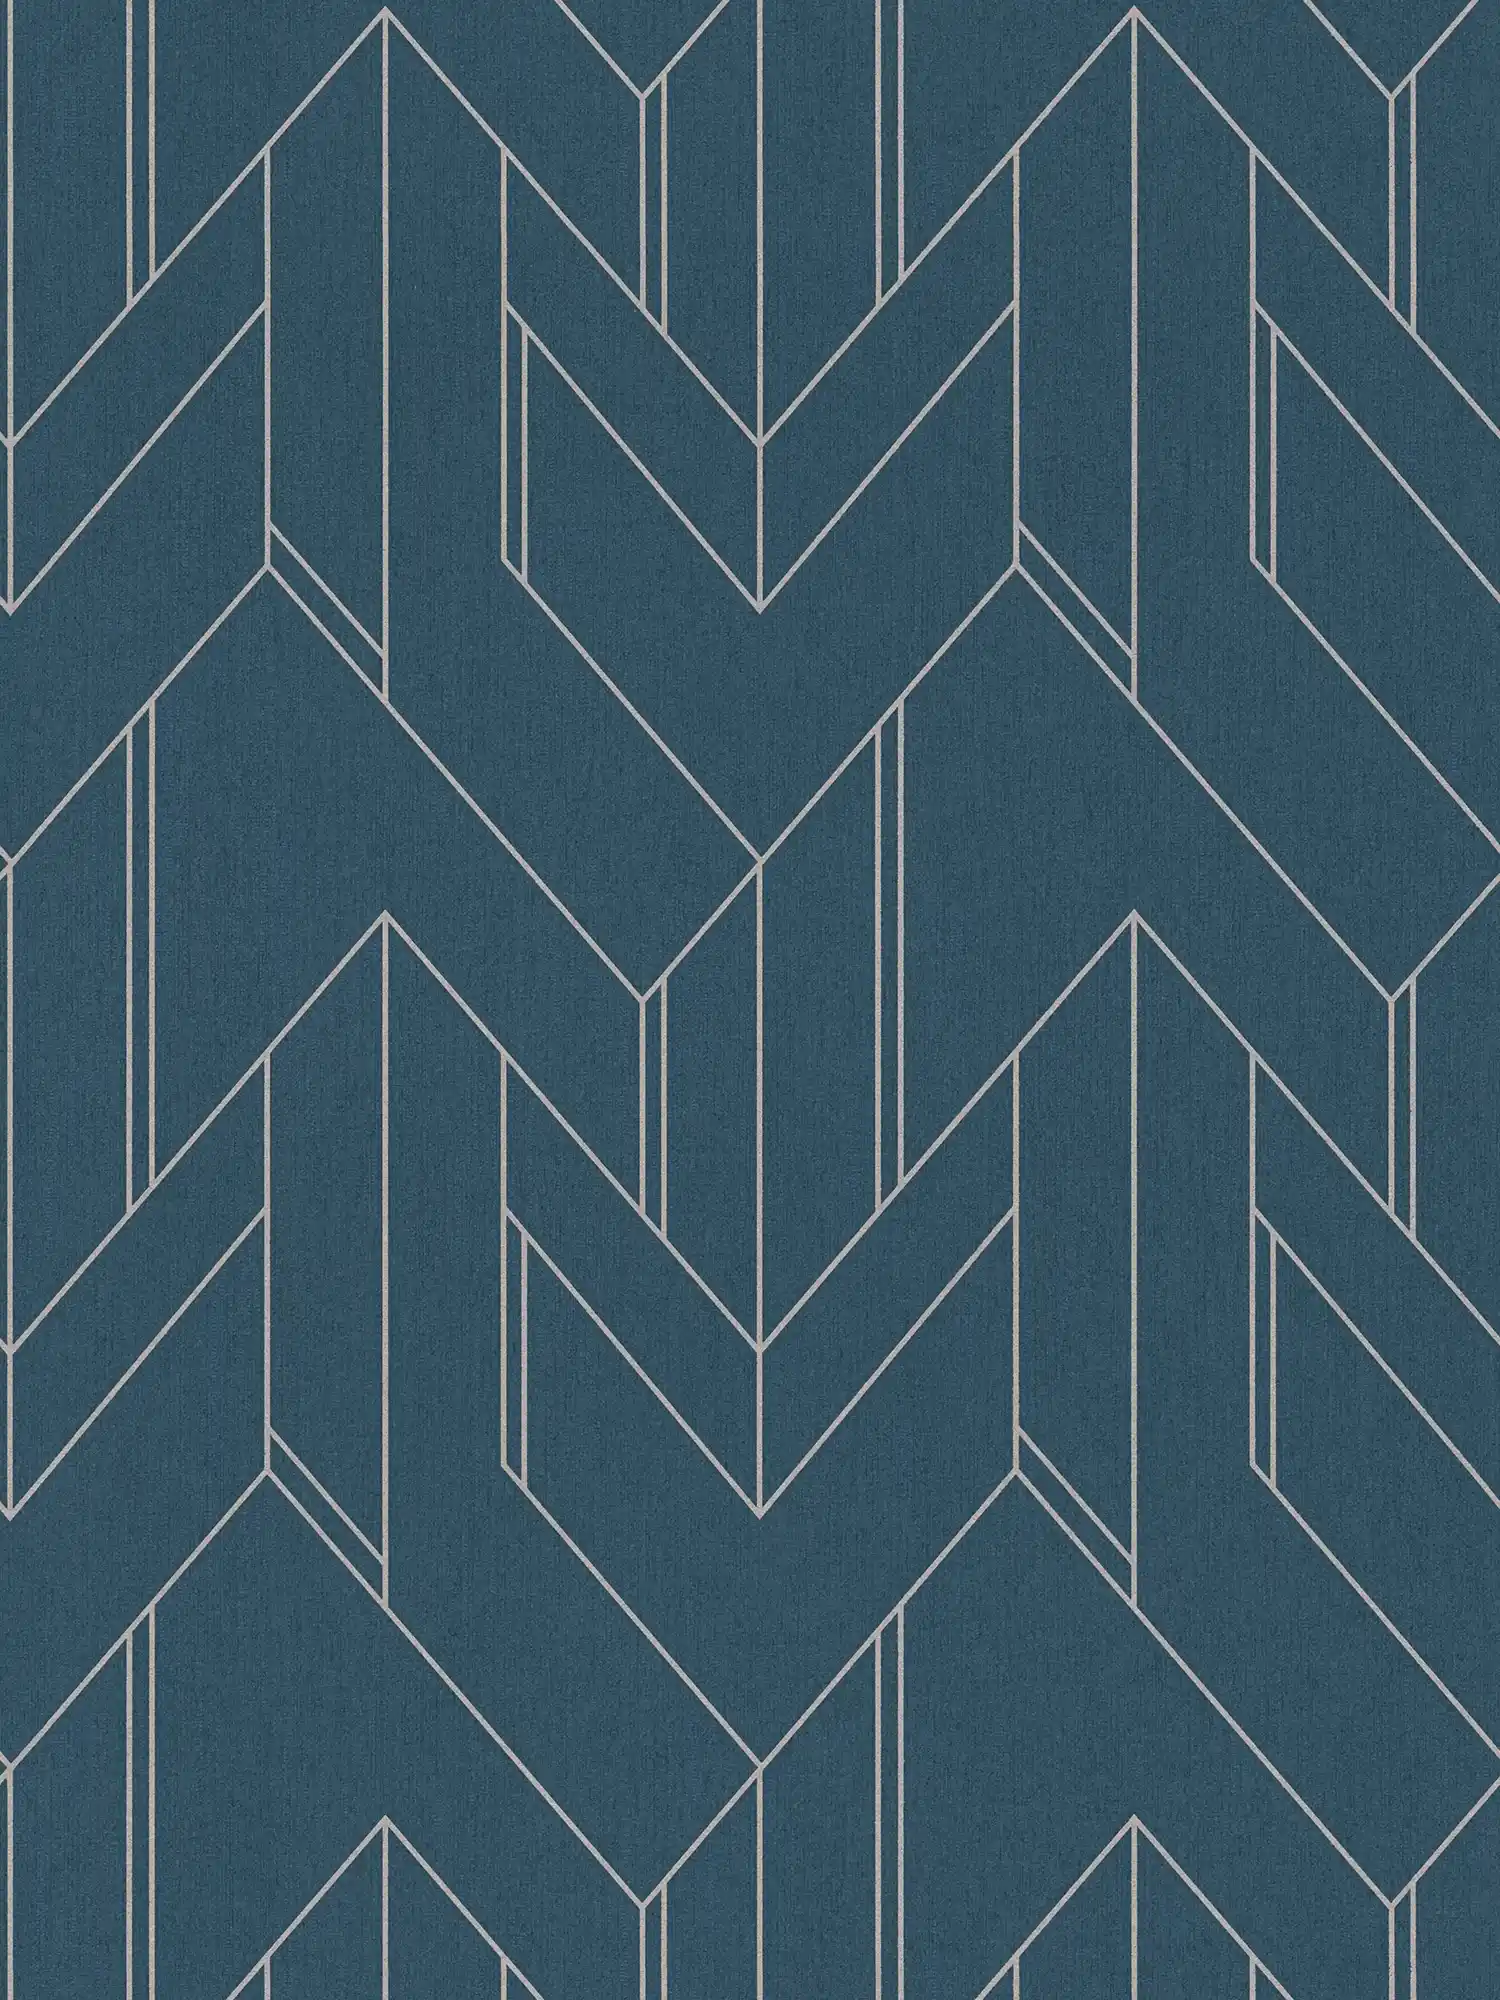 Dark blue wallpaper with silver graphic pattern & glossy effect - blue, metallic
